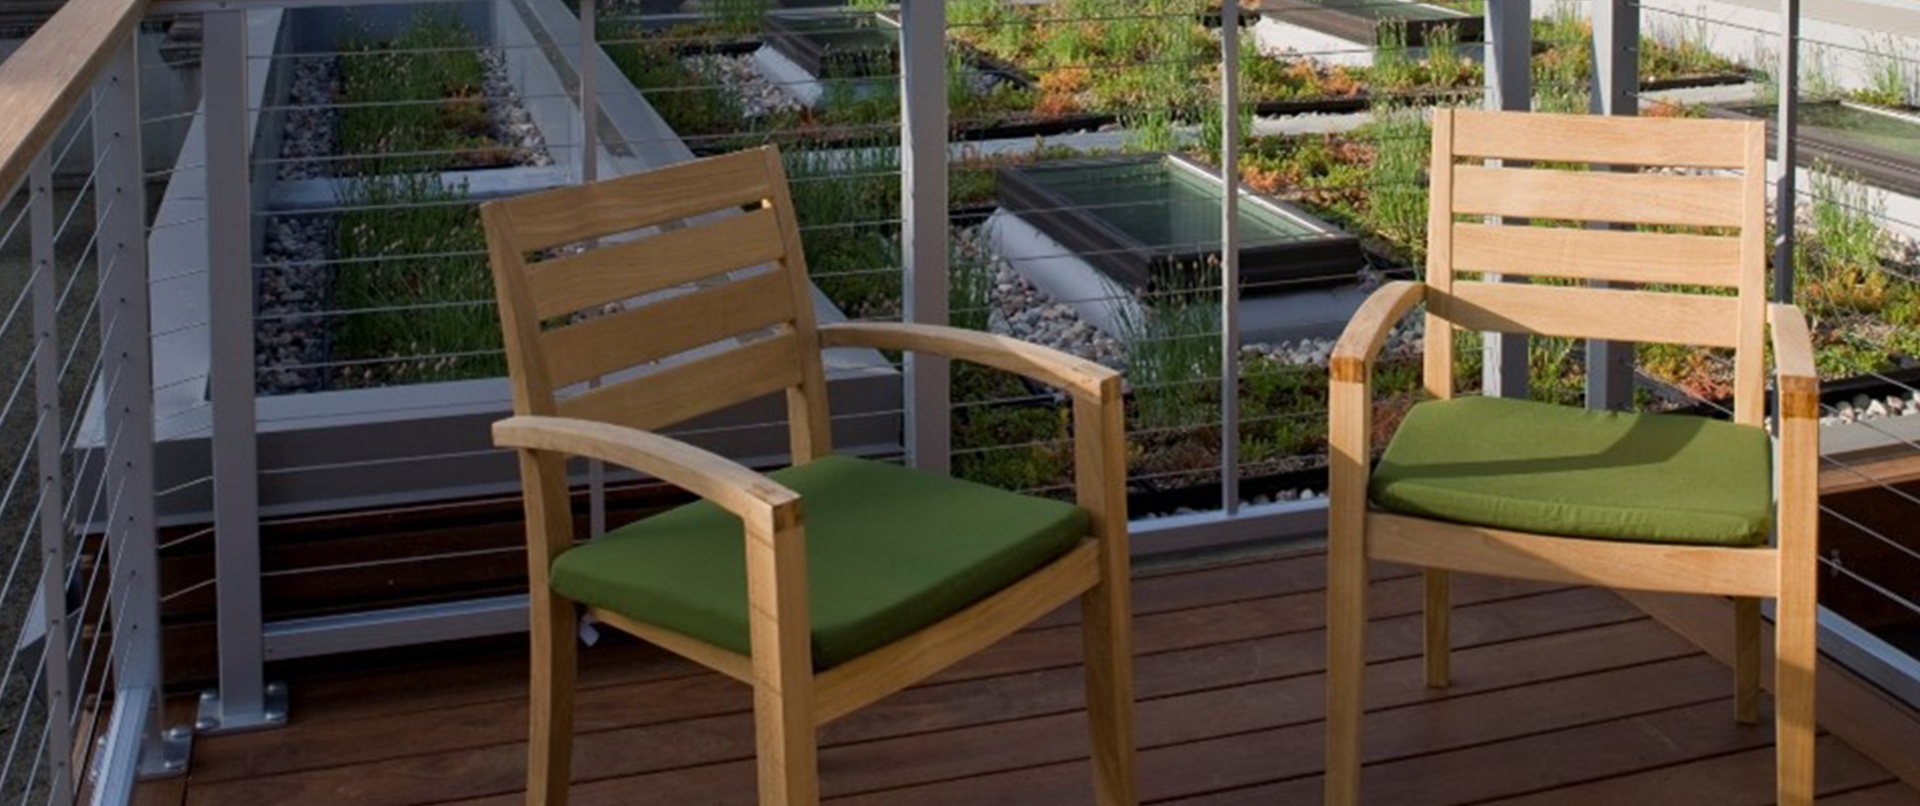 Deck Seating Area with Greenery View